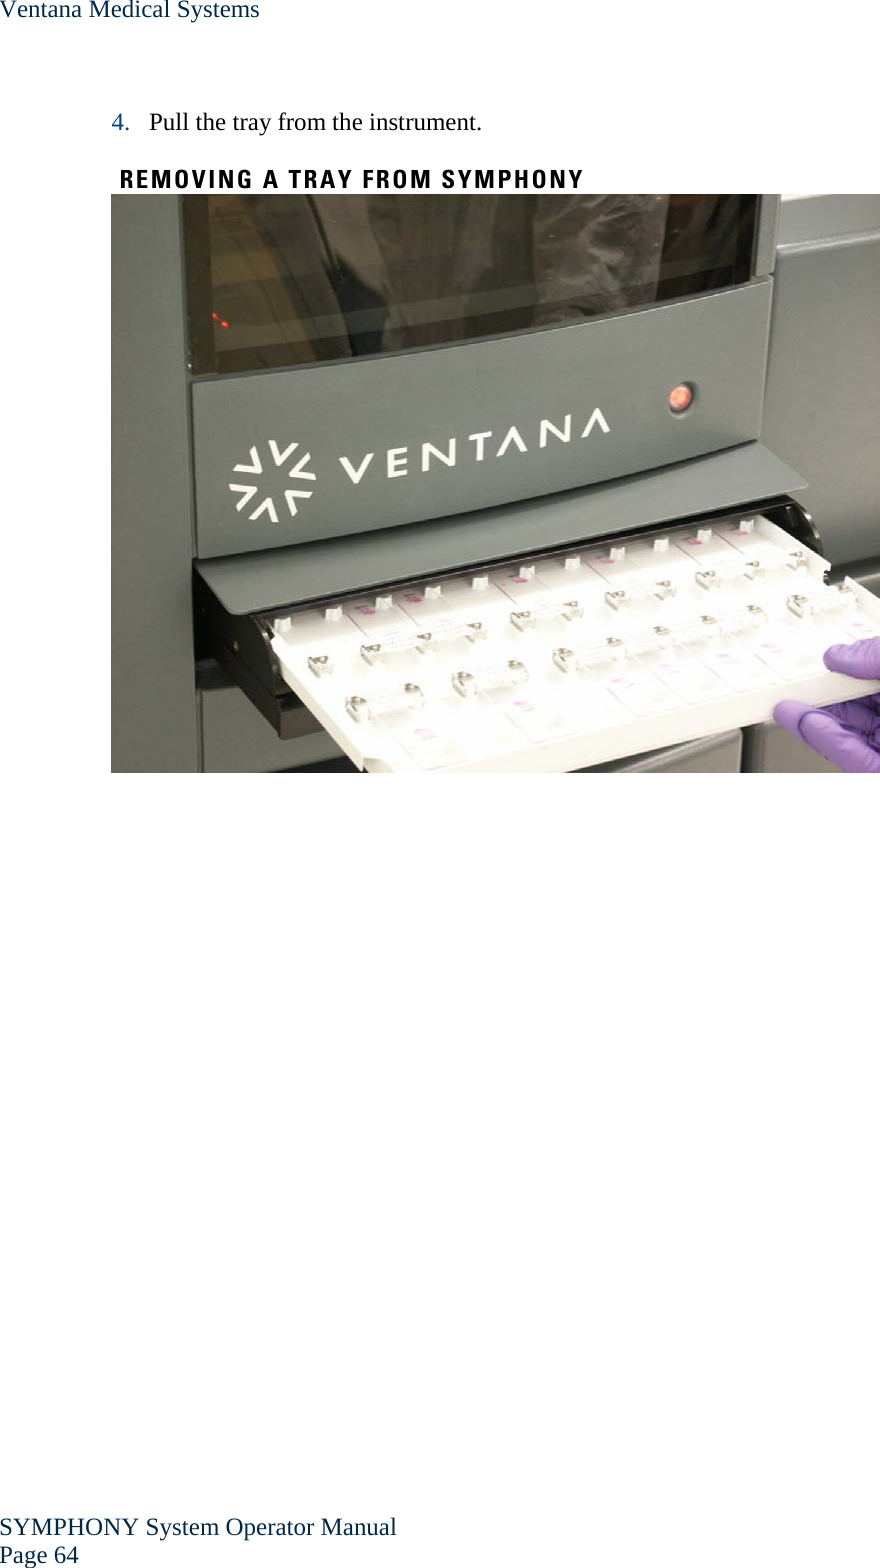 Ventana Medical Systems SYMPHONY System Operator Manual Page 64    4. Pull the tray from the instrument.   REMOVING A TRAY FROM SYMPHONY    